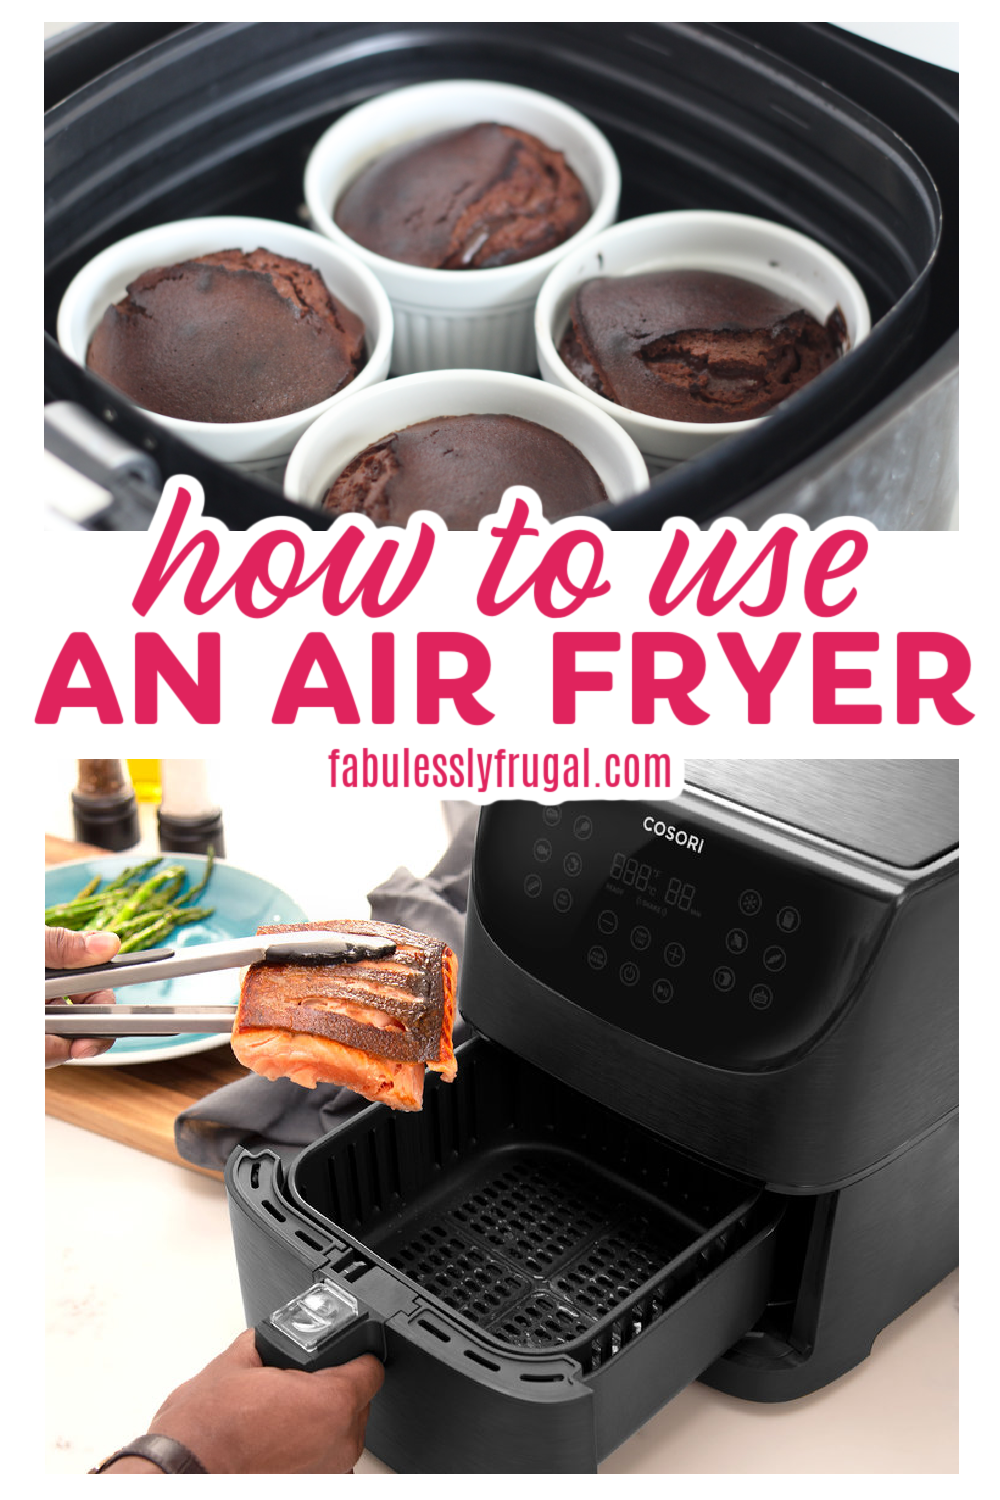 https://fabulesslyfrugal.com/wp-content/uploads/2020/11/how-to-use-an-air-fryer-1-1.png